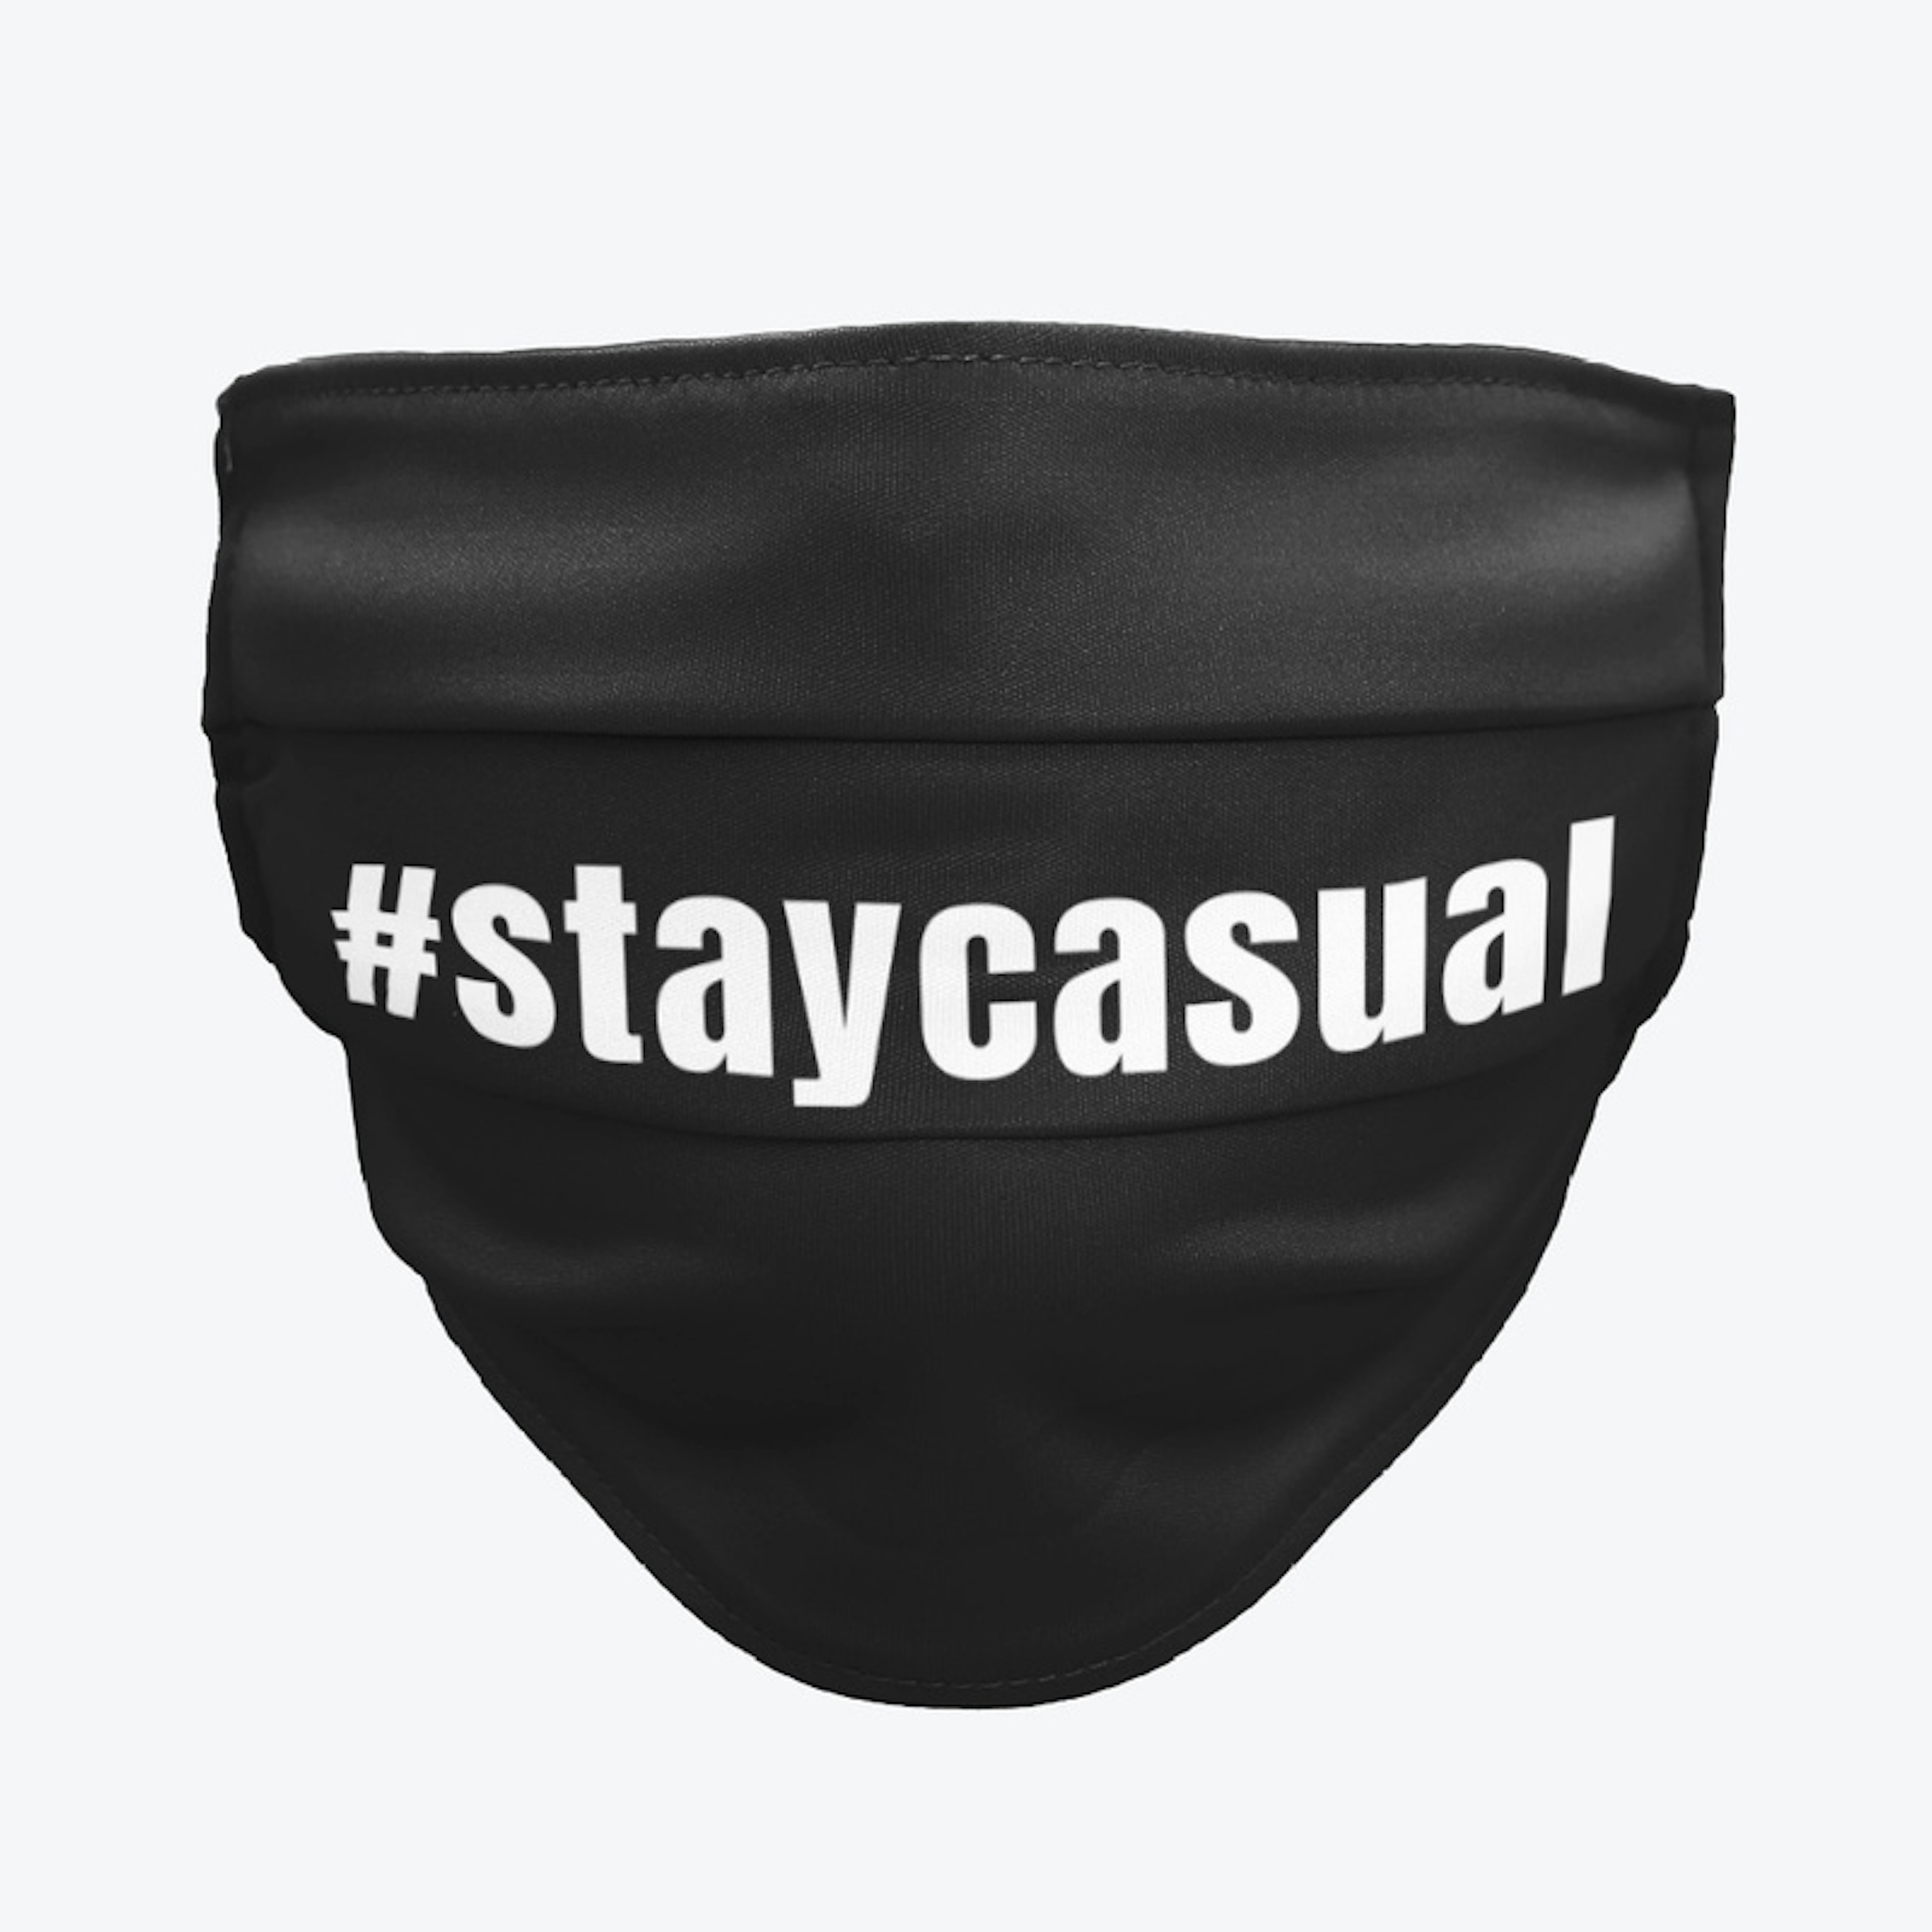 #staycasual